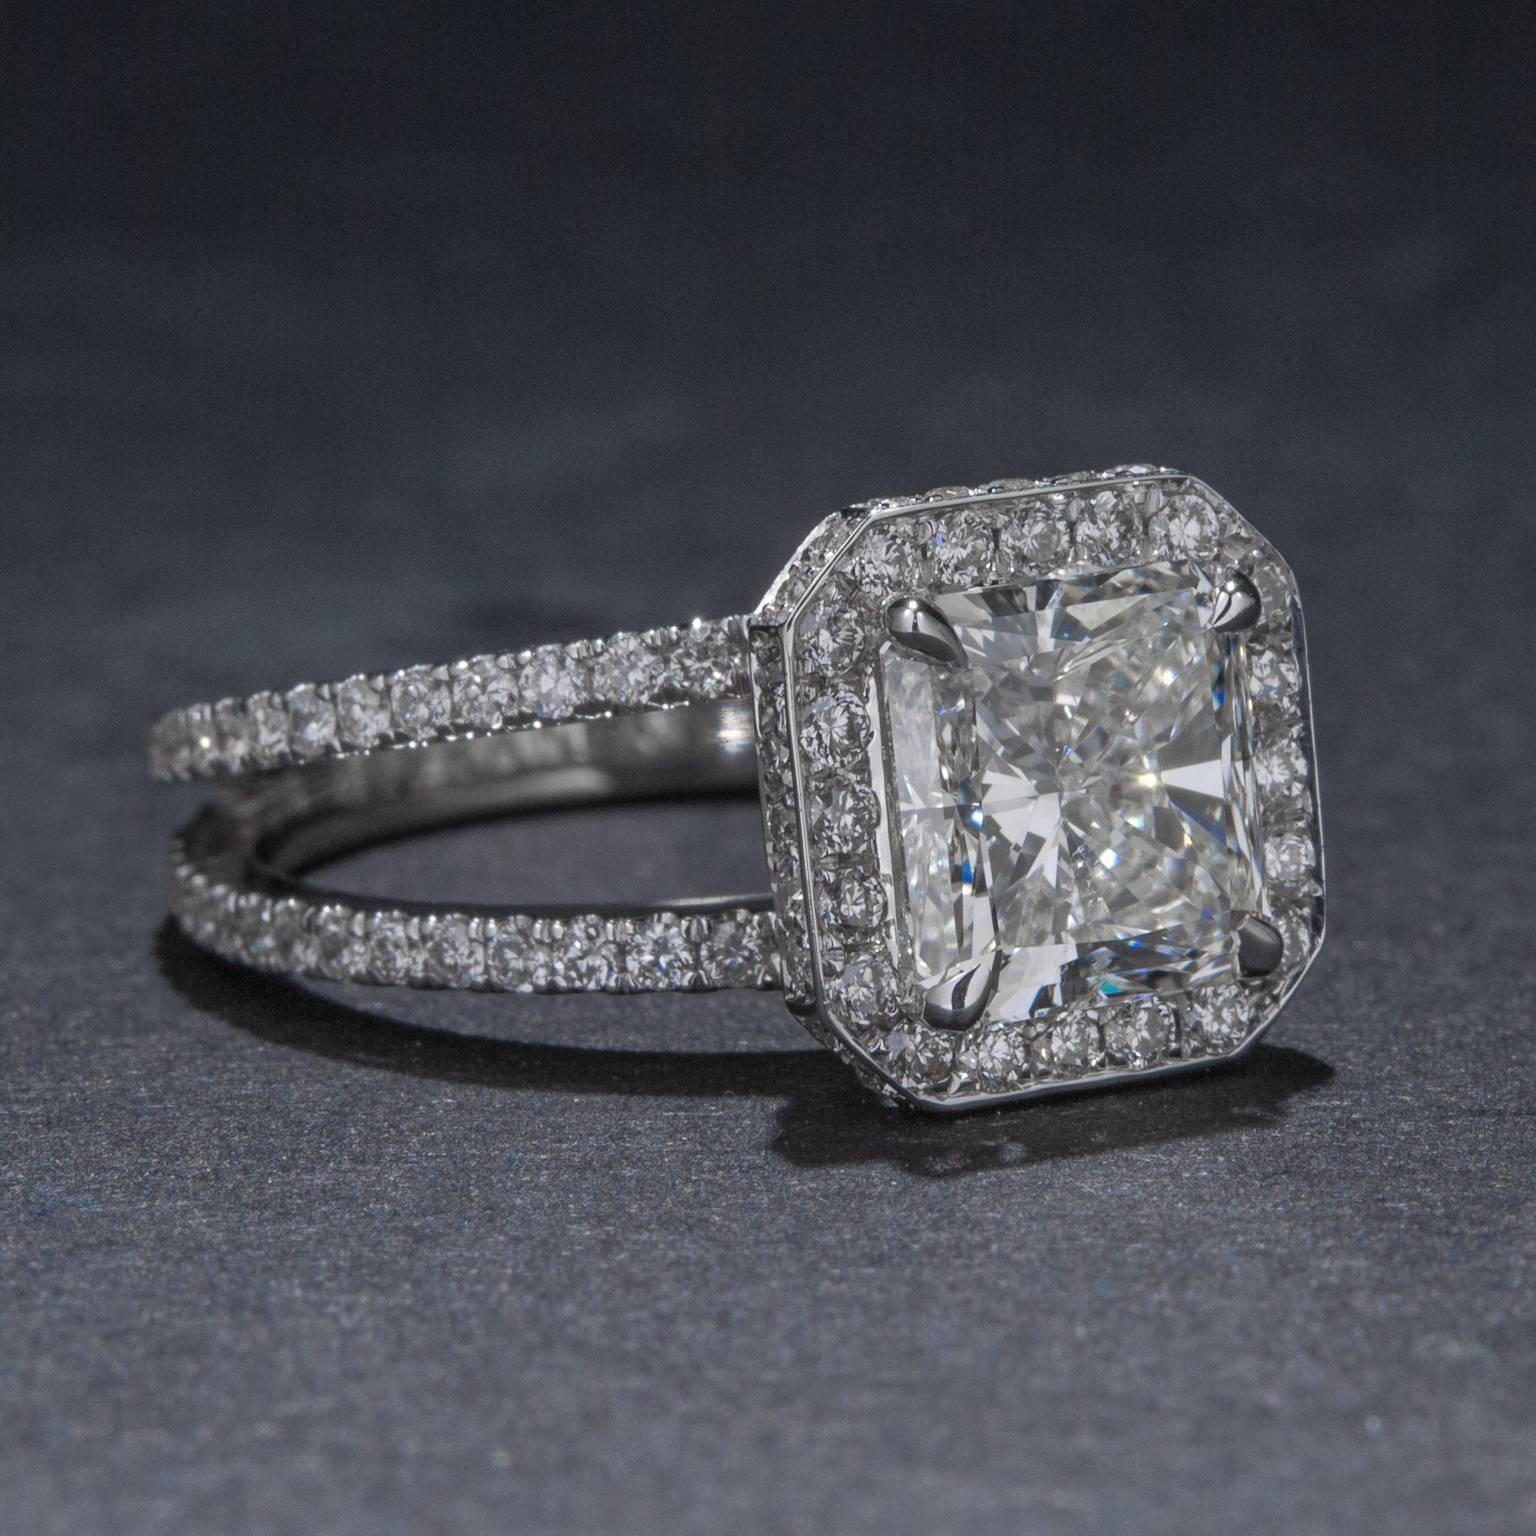 This gorgeous piece features a 2.05 carat Radiant Cut center diamond (F color, VS2 clarity) and .90 total carats of pave diamonds set in a halo around the center stone and along the split shank. This ring is made in 18k white gold and is size 6.75.